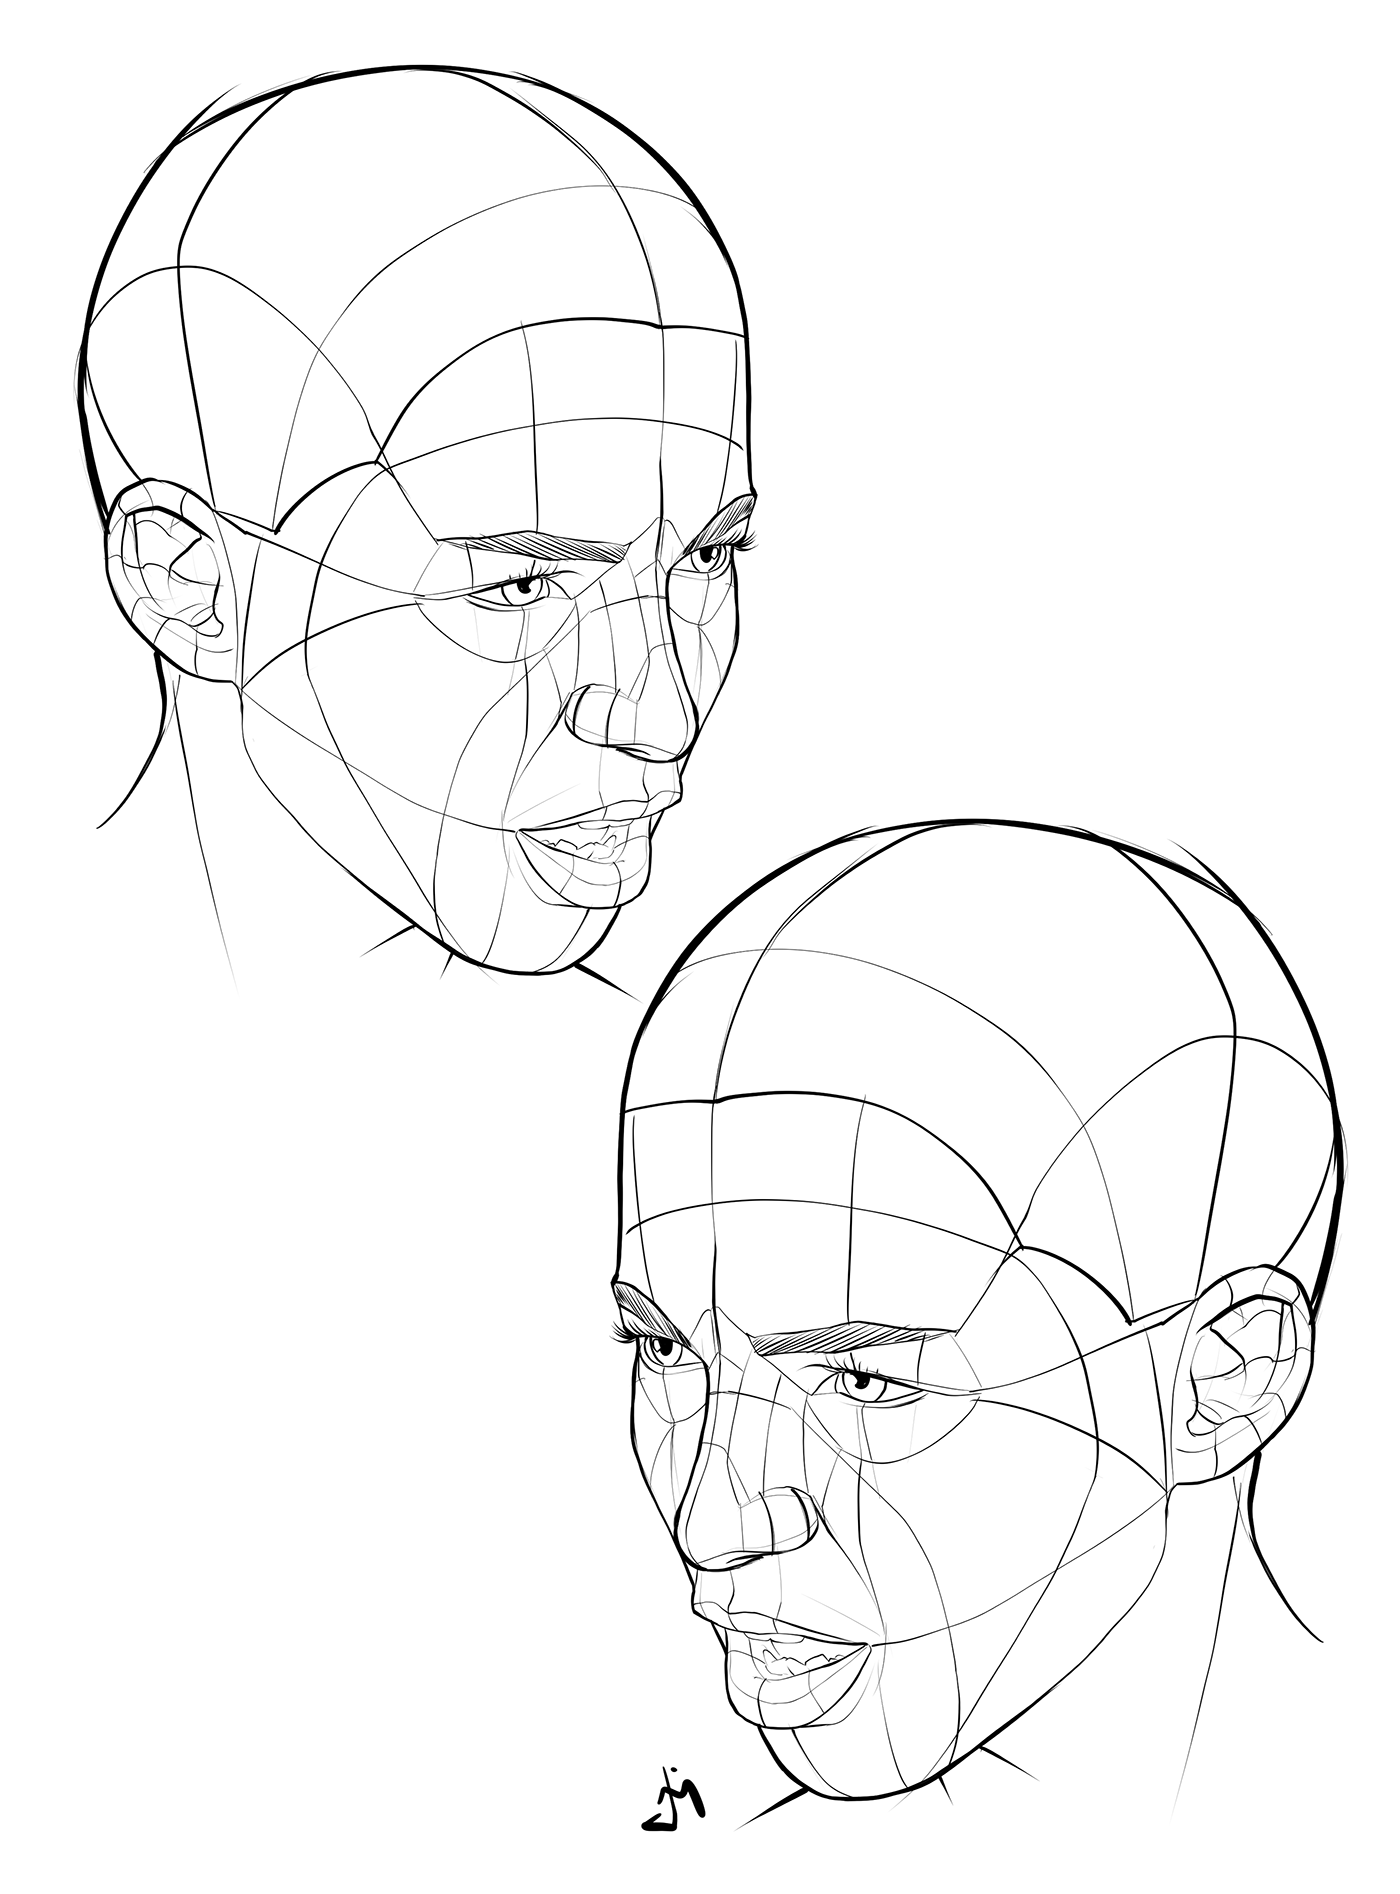 faces Poses reference